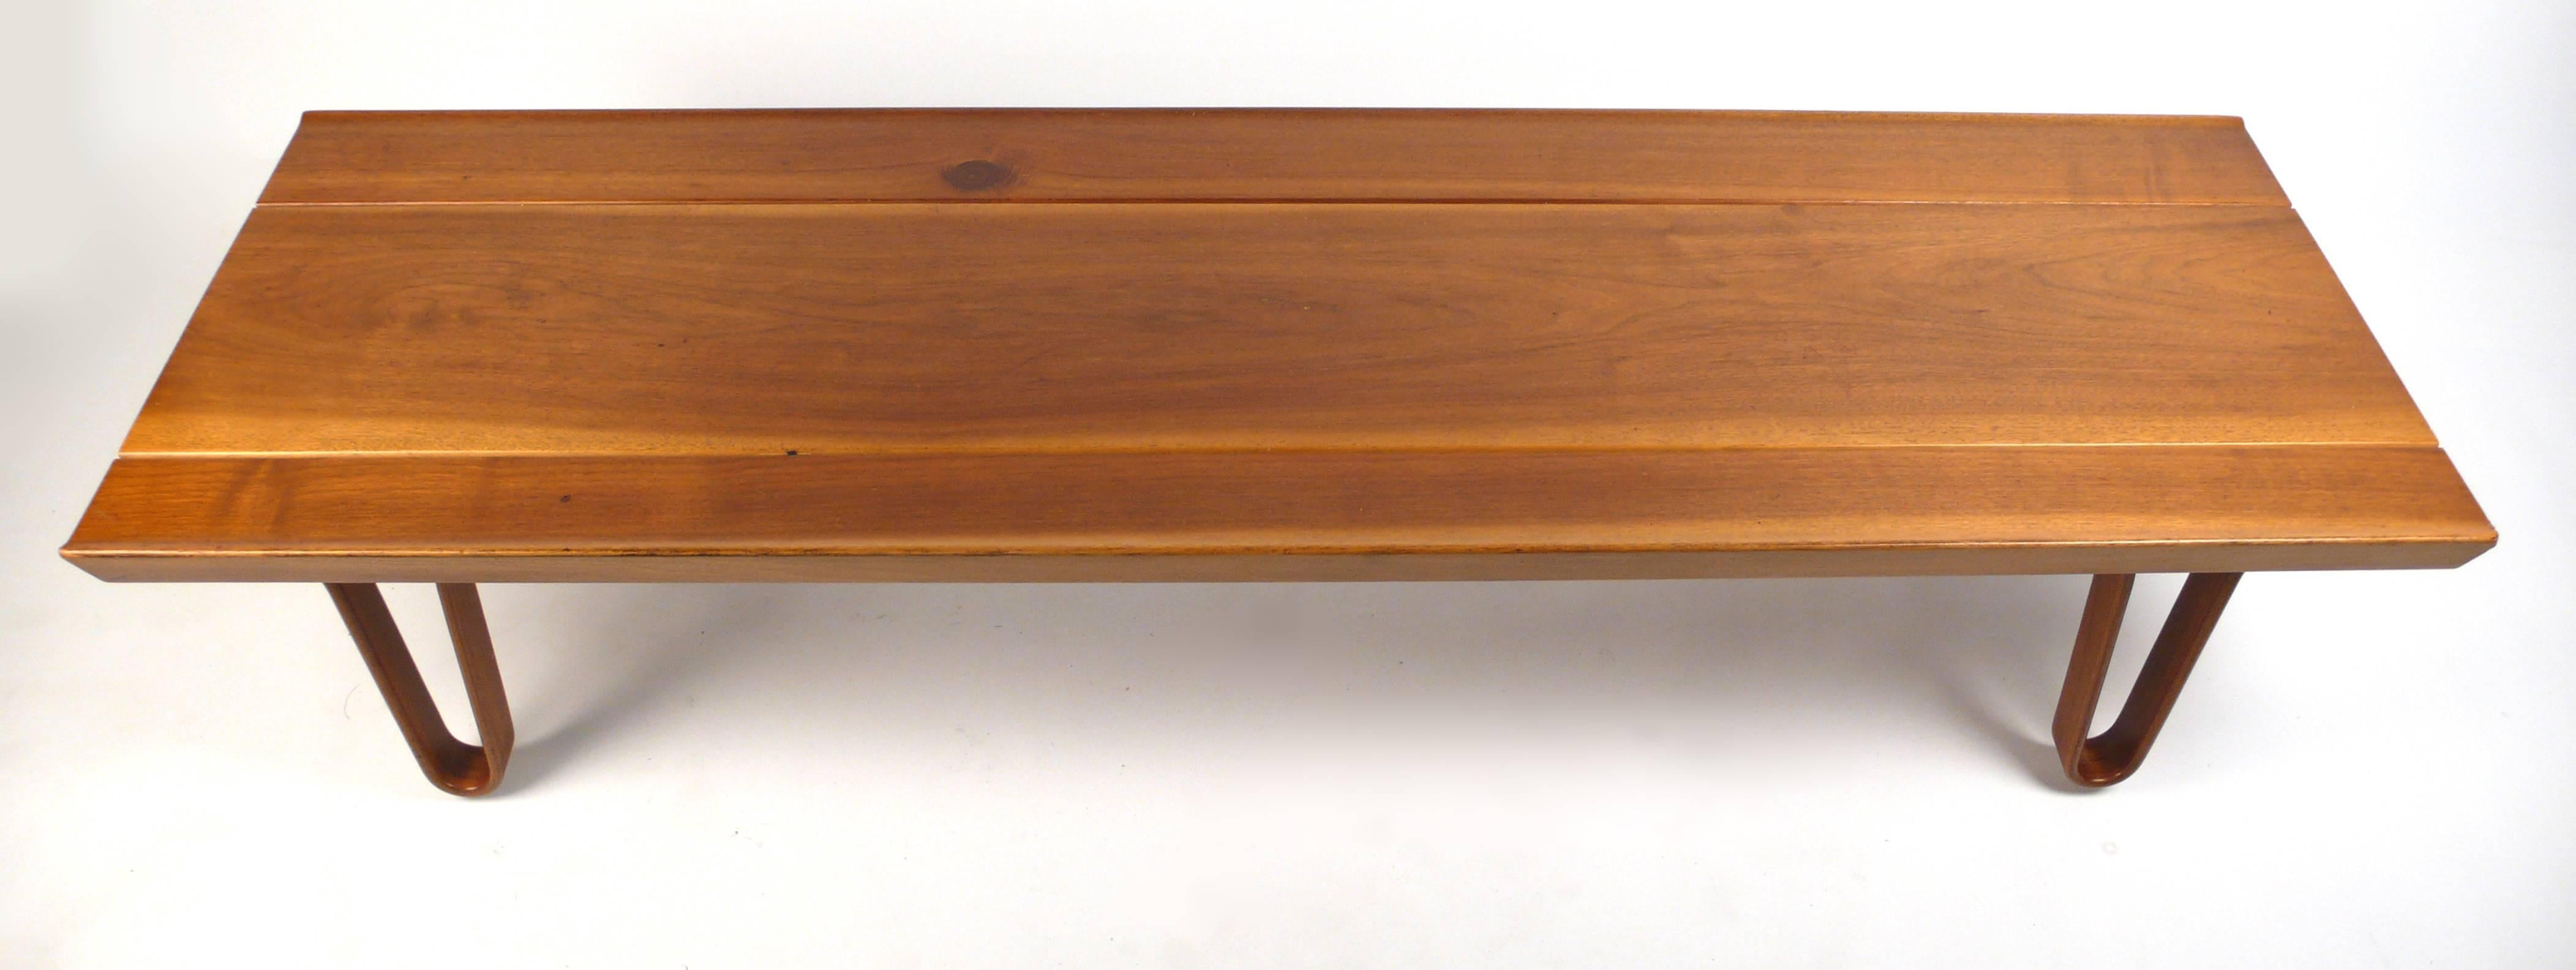 Long-John Bench designed by Edward Wormley for Dunbar. Solid walnut top with wood hairpin legs.